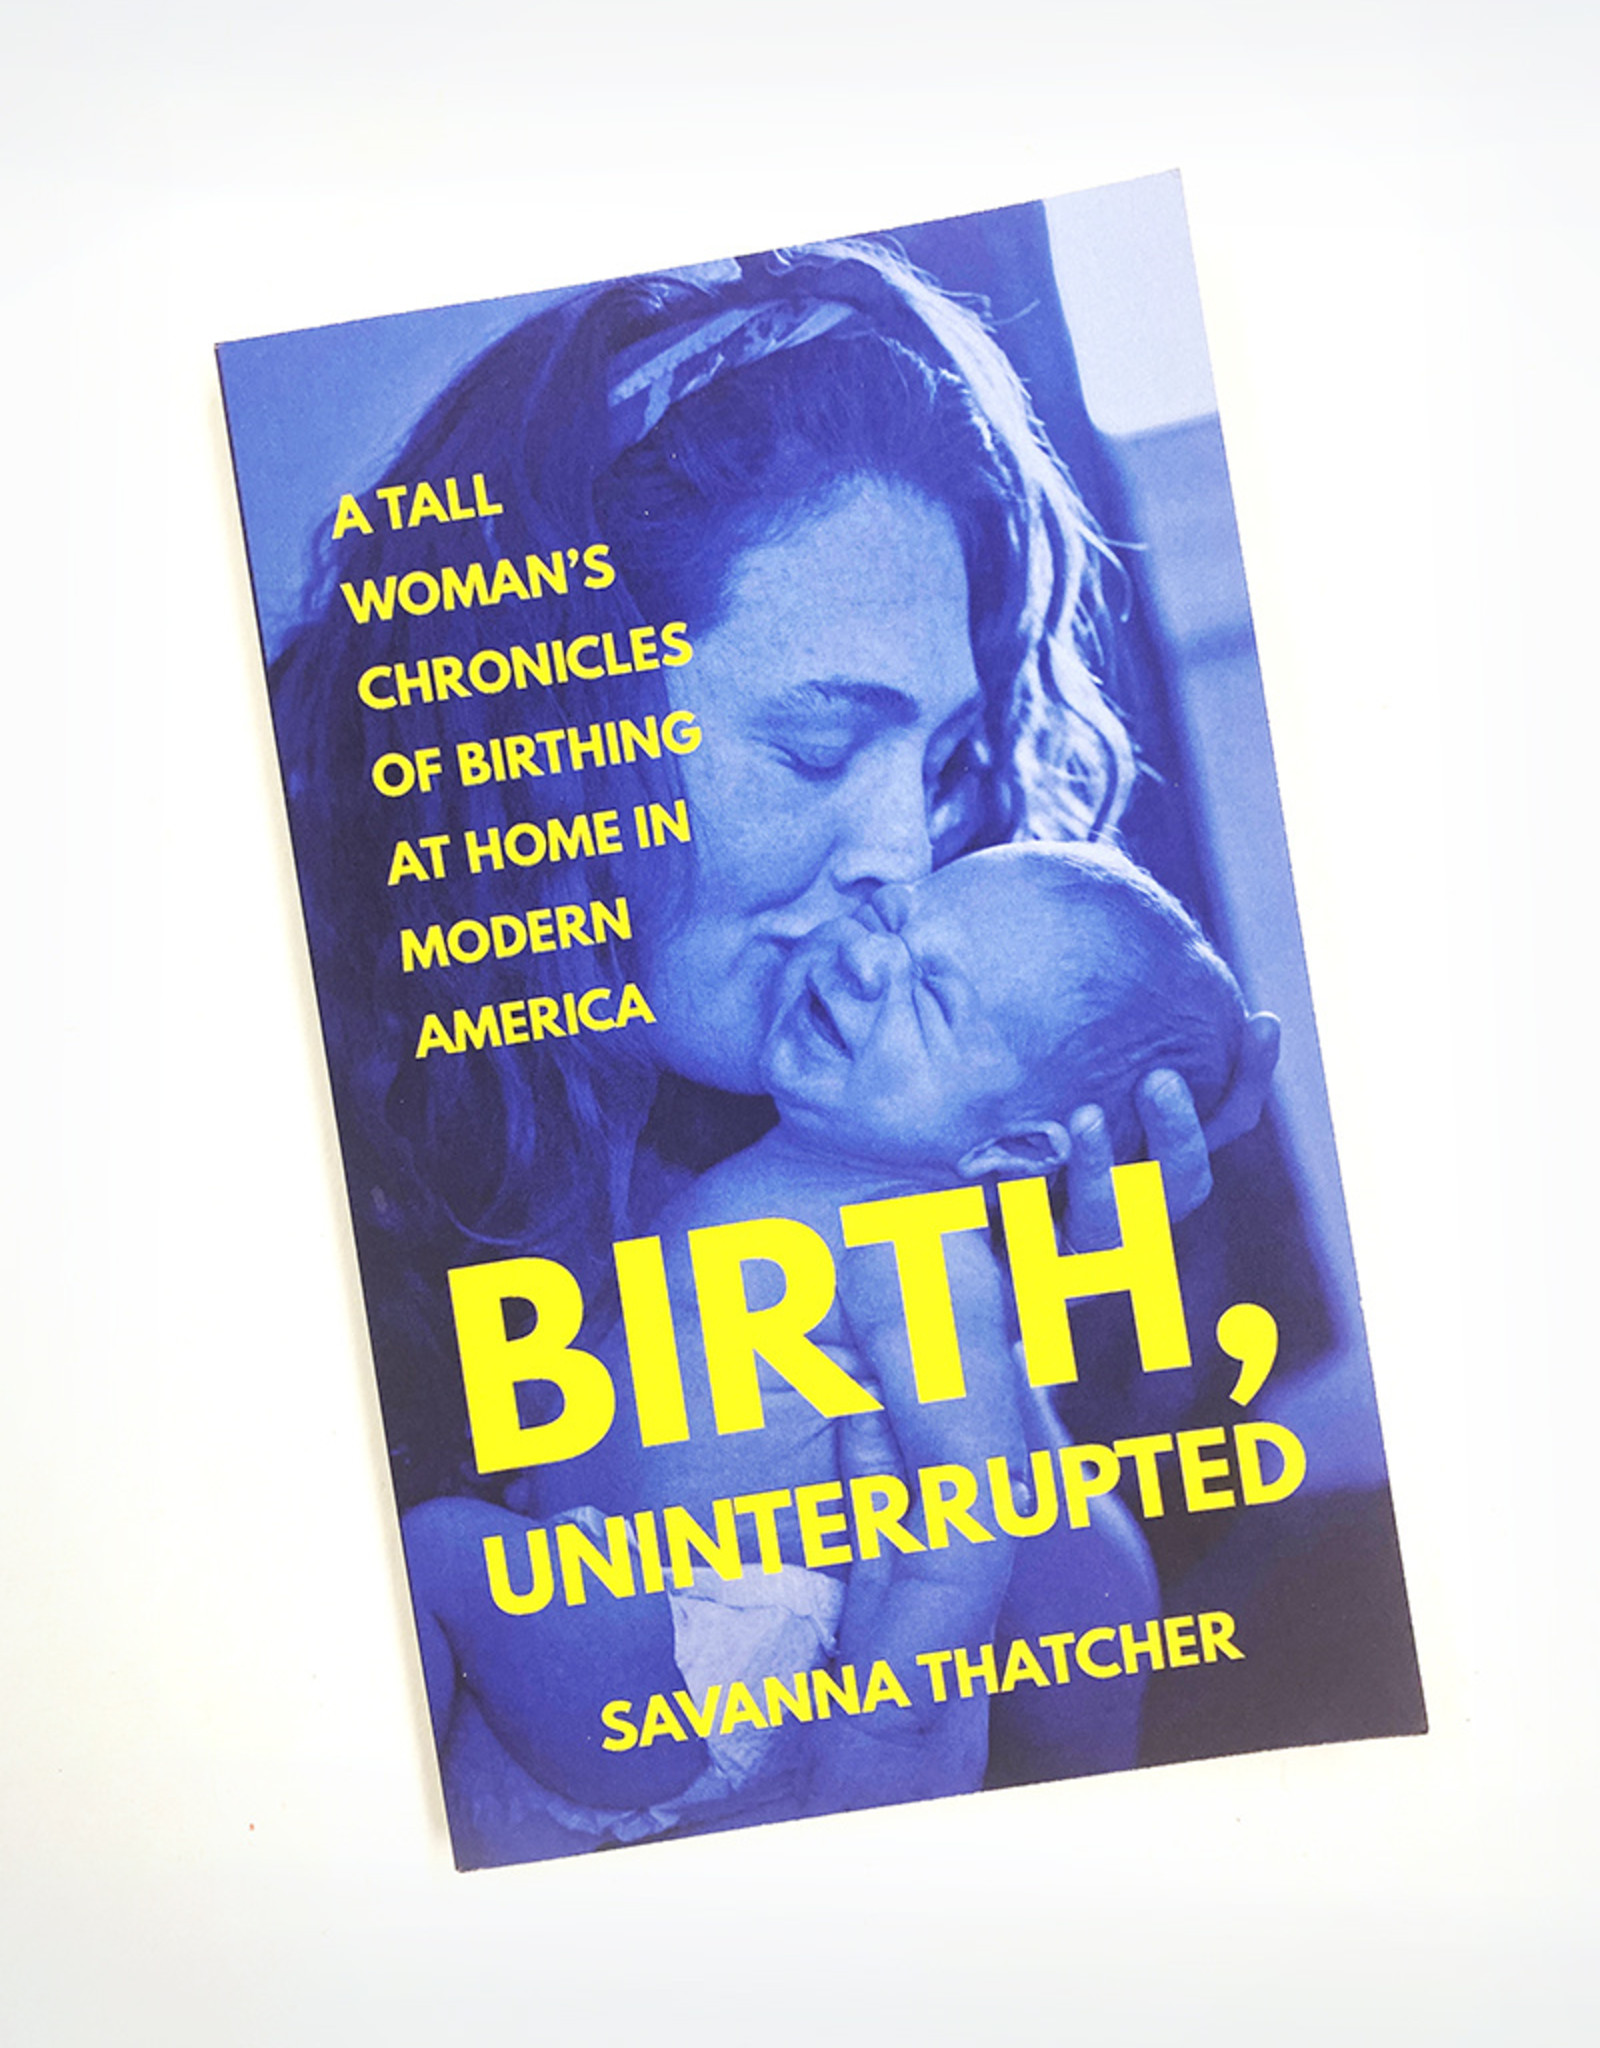 Savanna Thatcher Birth, Uninterrupted: A Tall Woman's Chronicles of Birthing At Home In Modern America